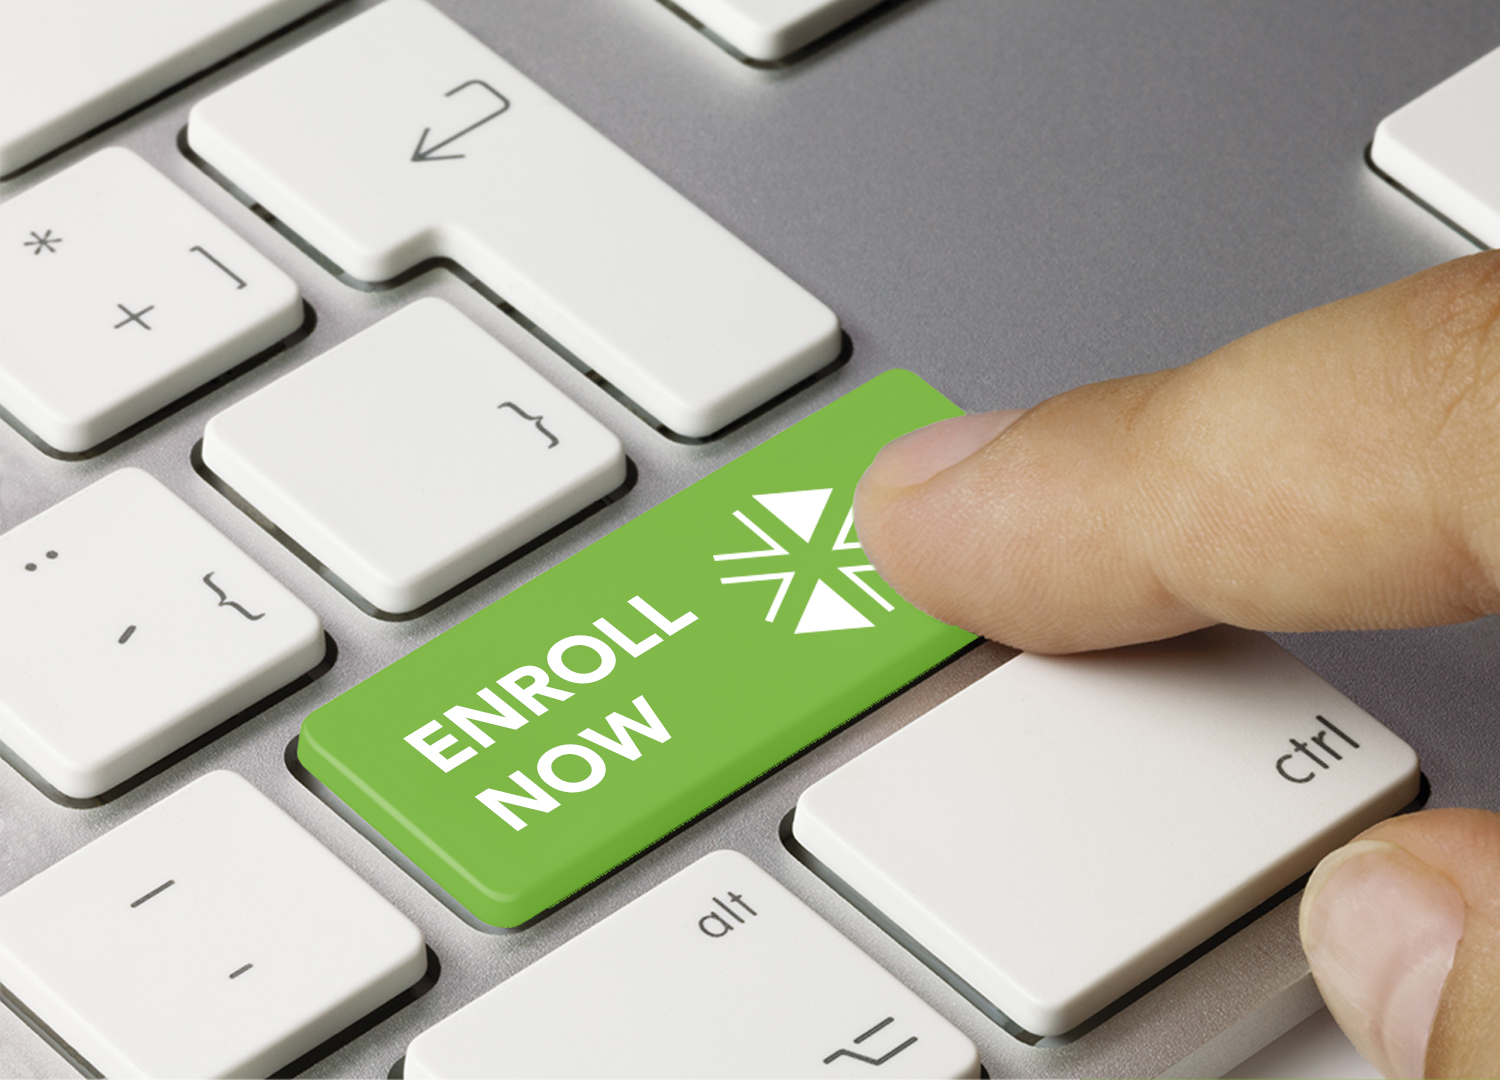 Close up of a finger pressing a key on a keyboard. The key is green and reads “Enroll Now”